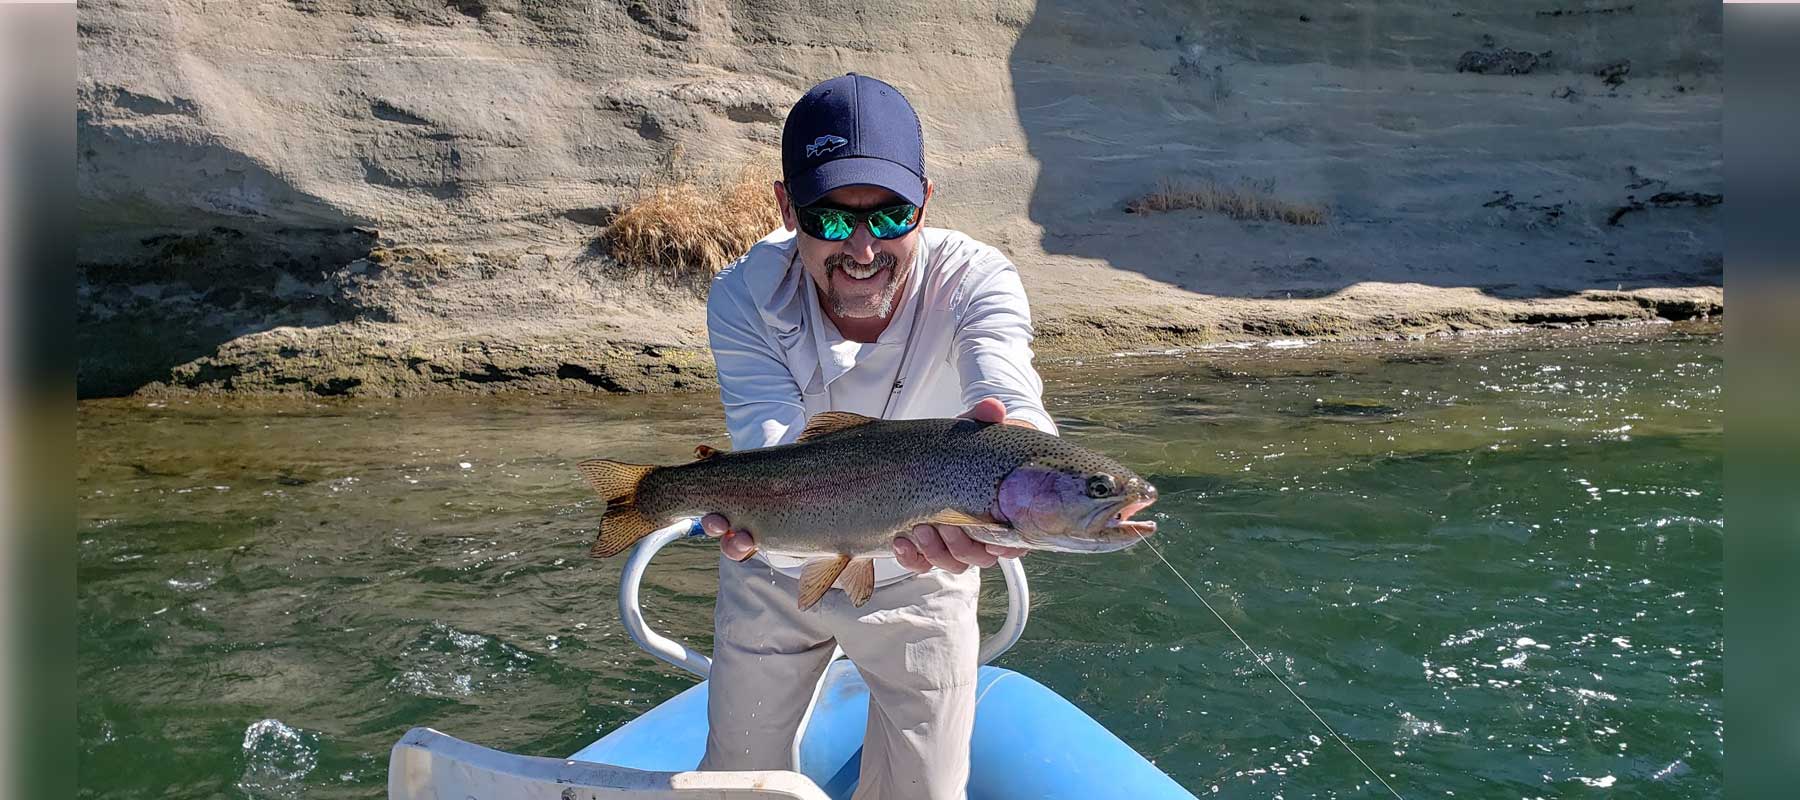 February 24th Meeting – Tim Landwehr on “A Tight Lines Patagonia Adventure”  – Badger Fly Fishers